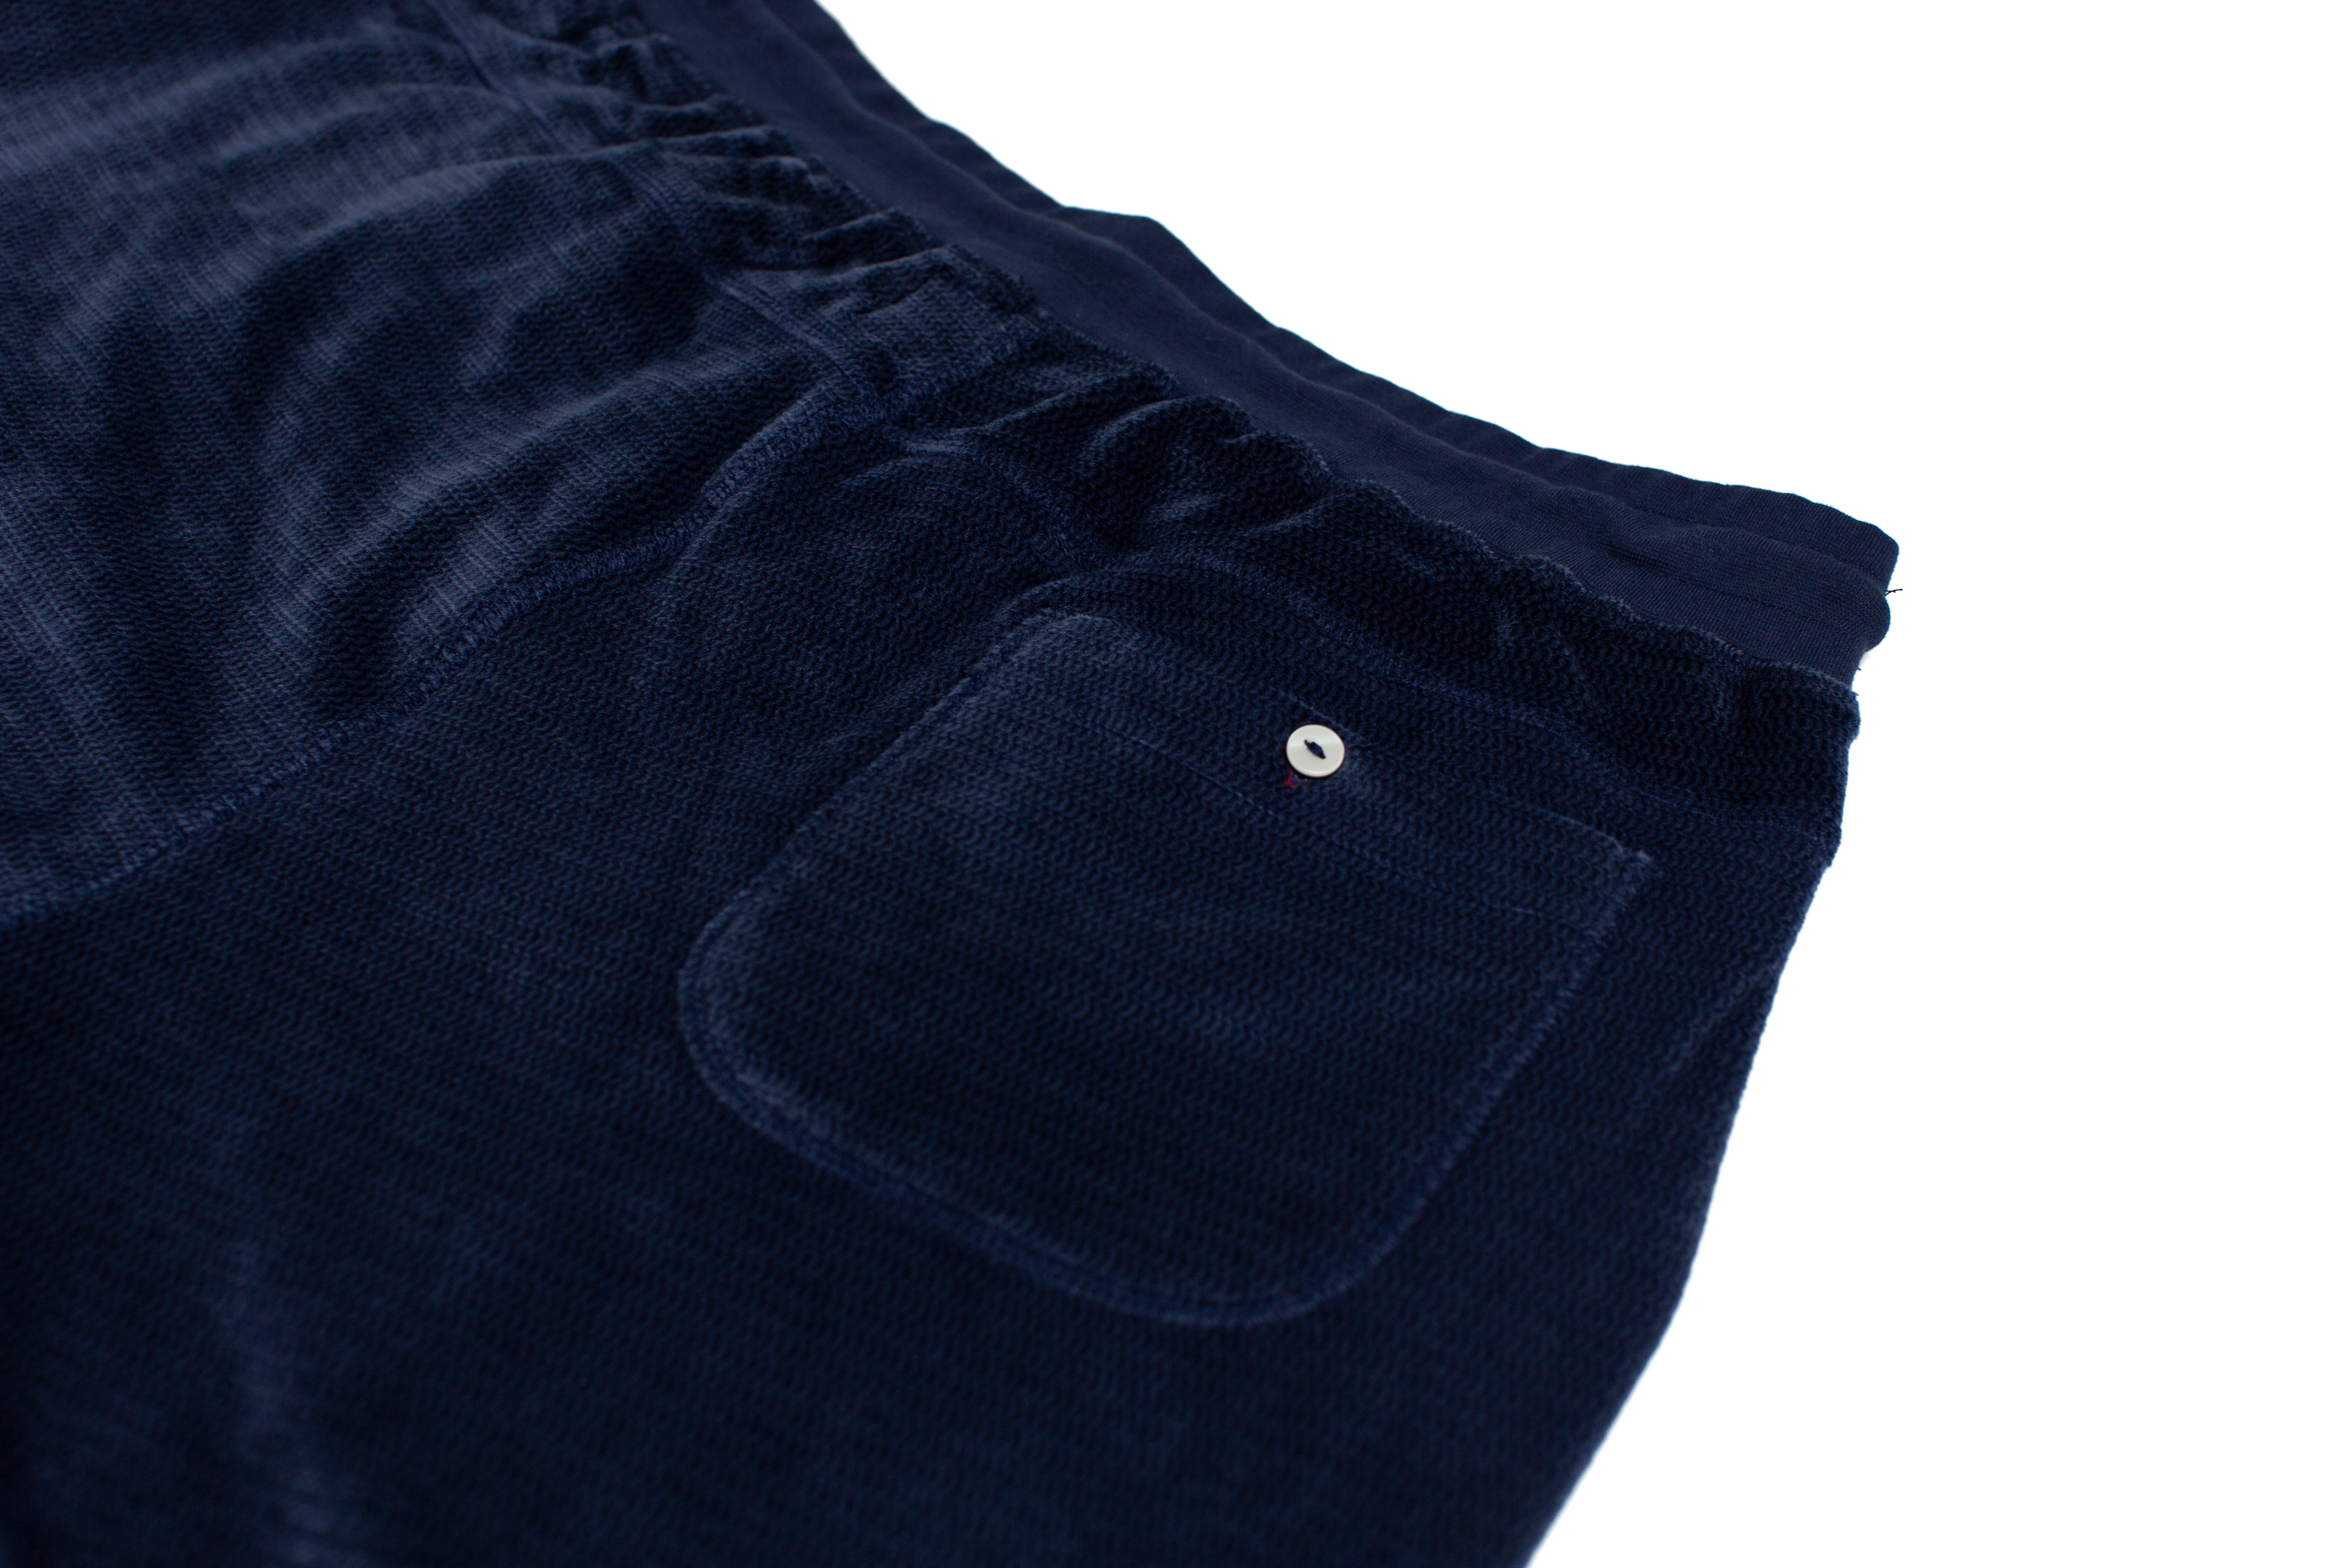 Chainlink Brushed Poly/Spandex Velour Navy Jogger